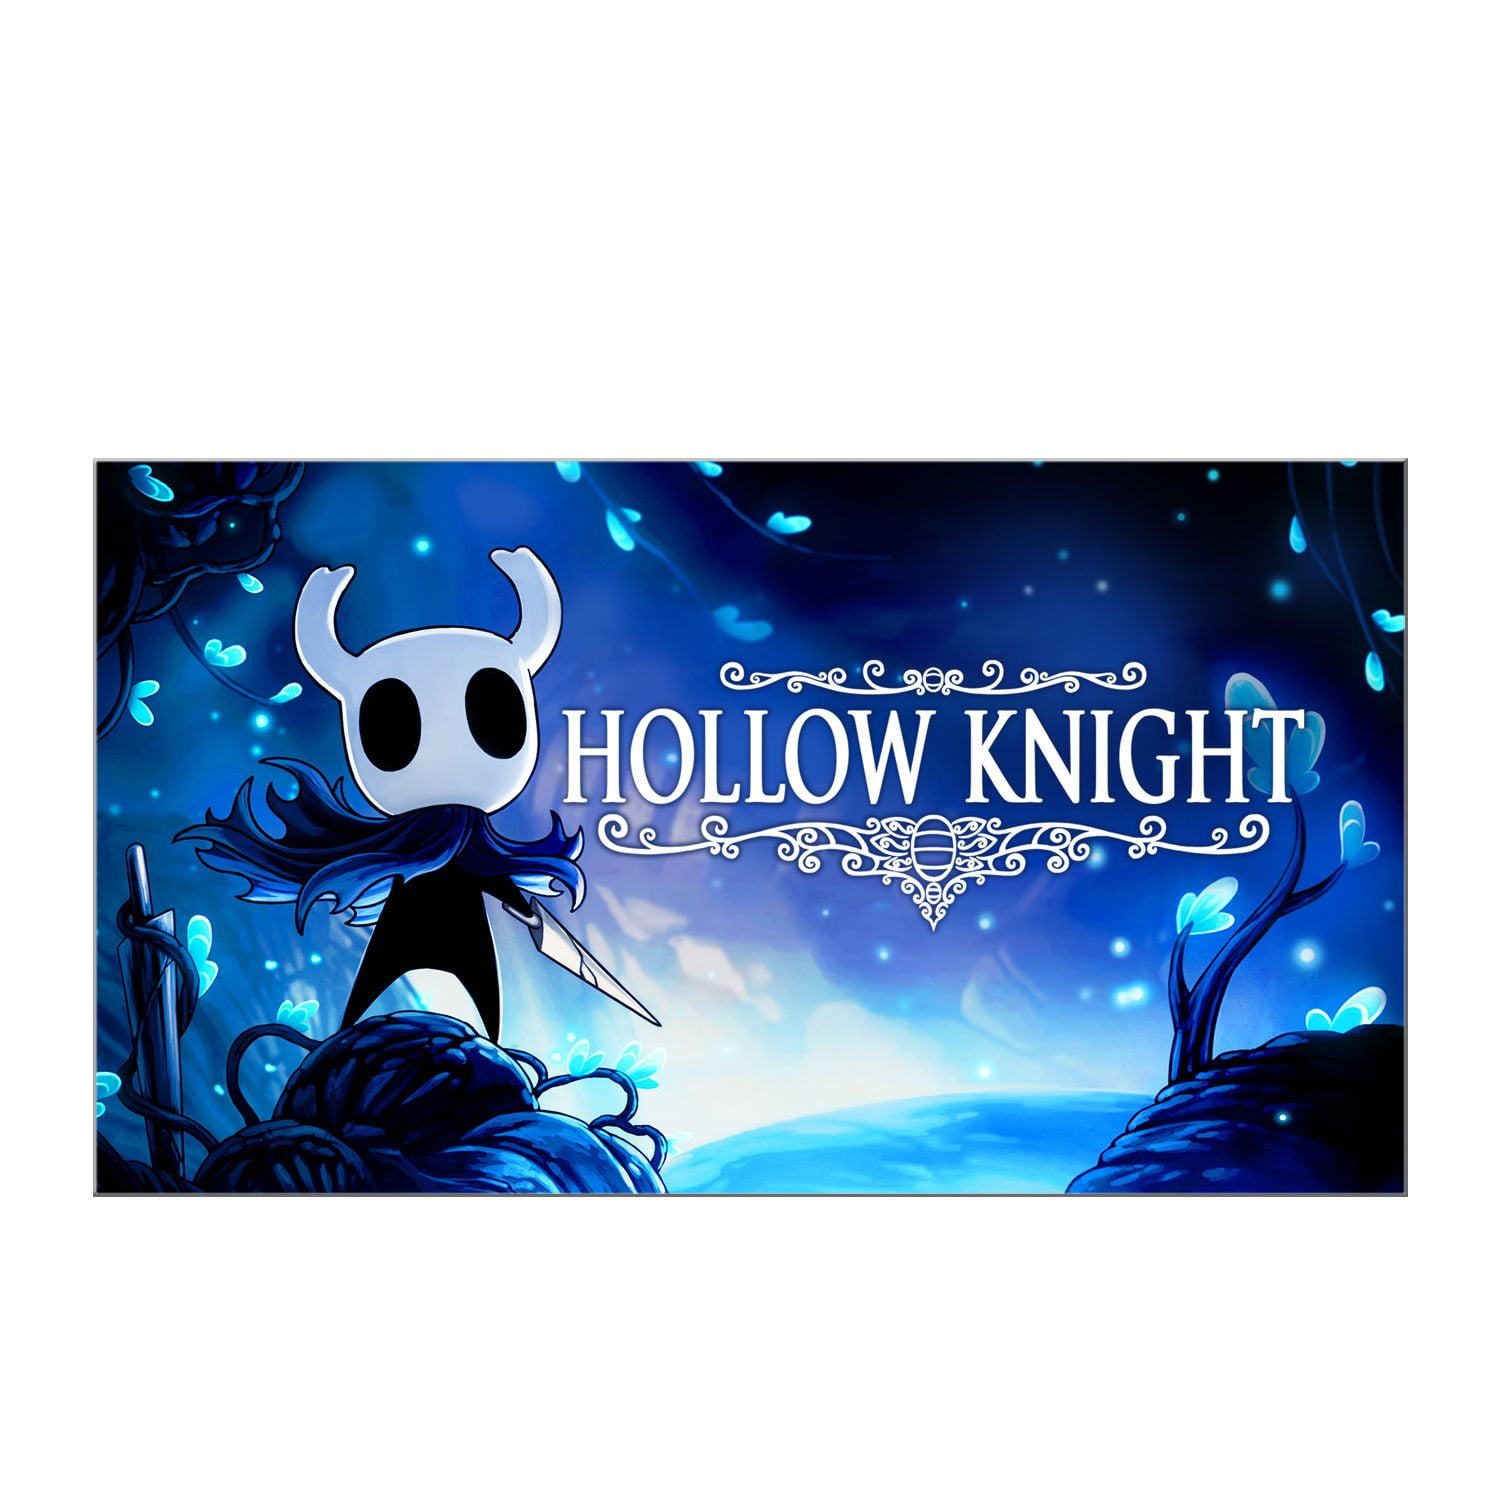 hollow knight pc how to quit